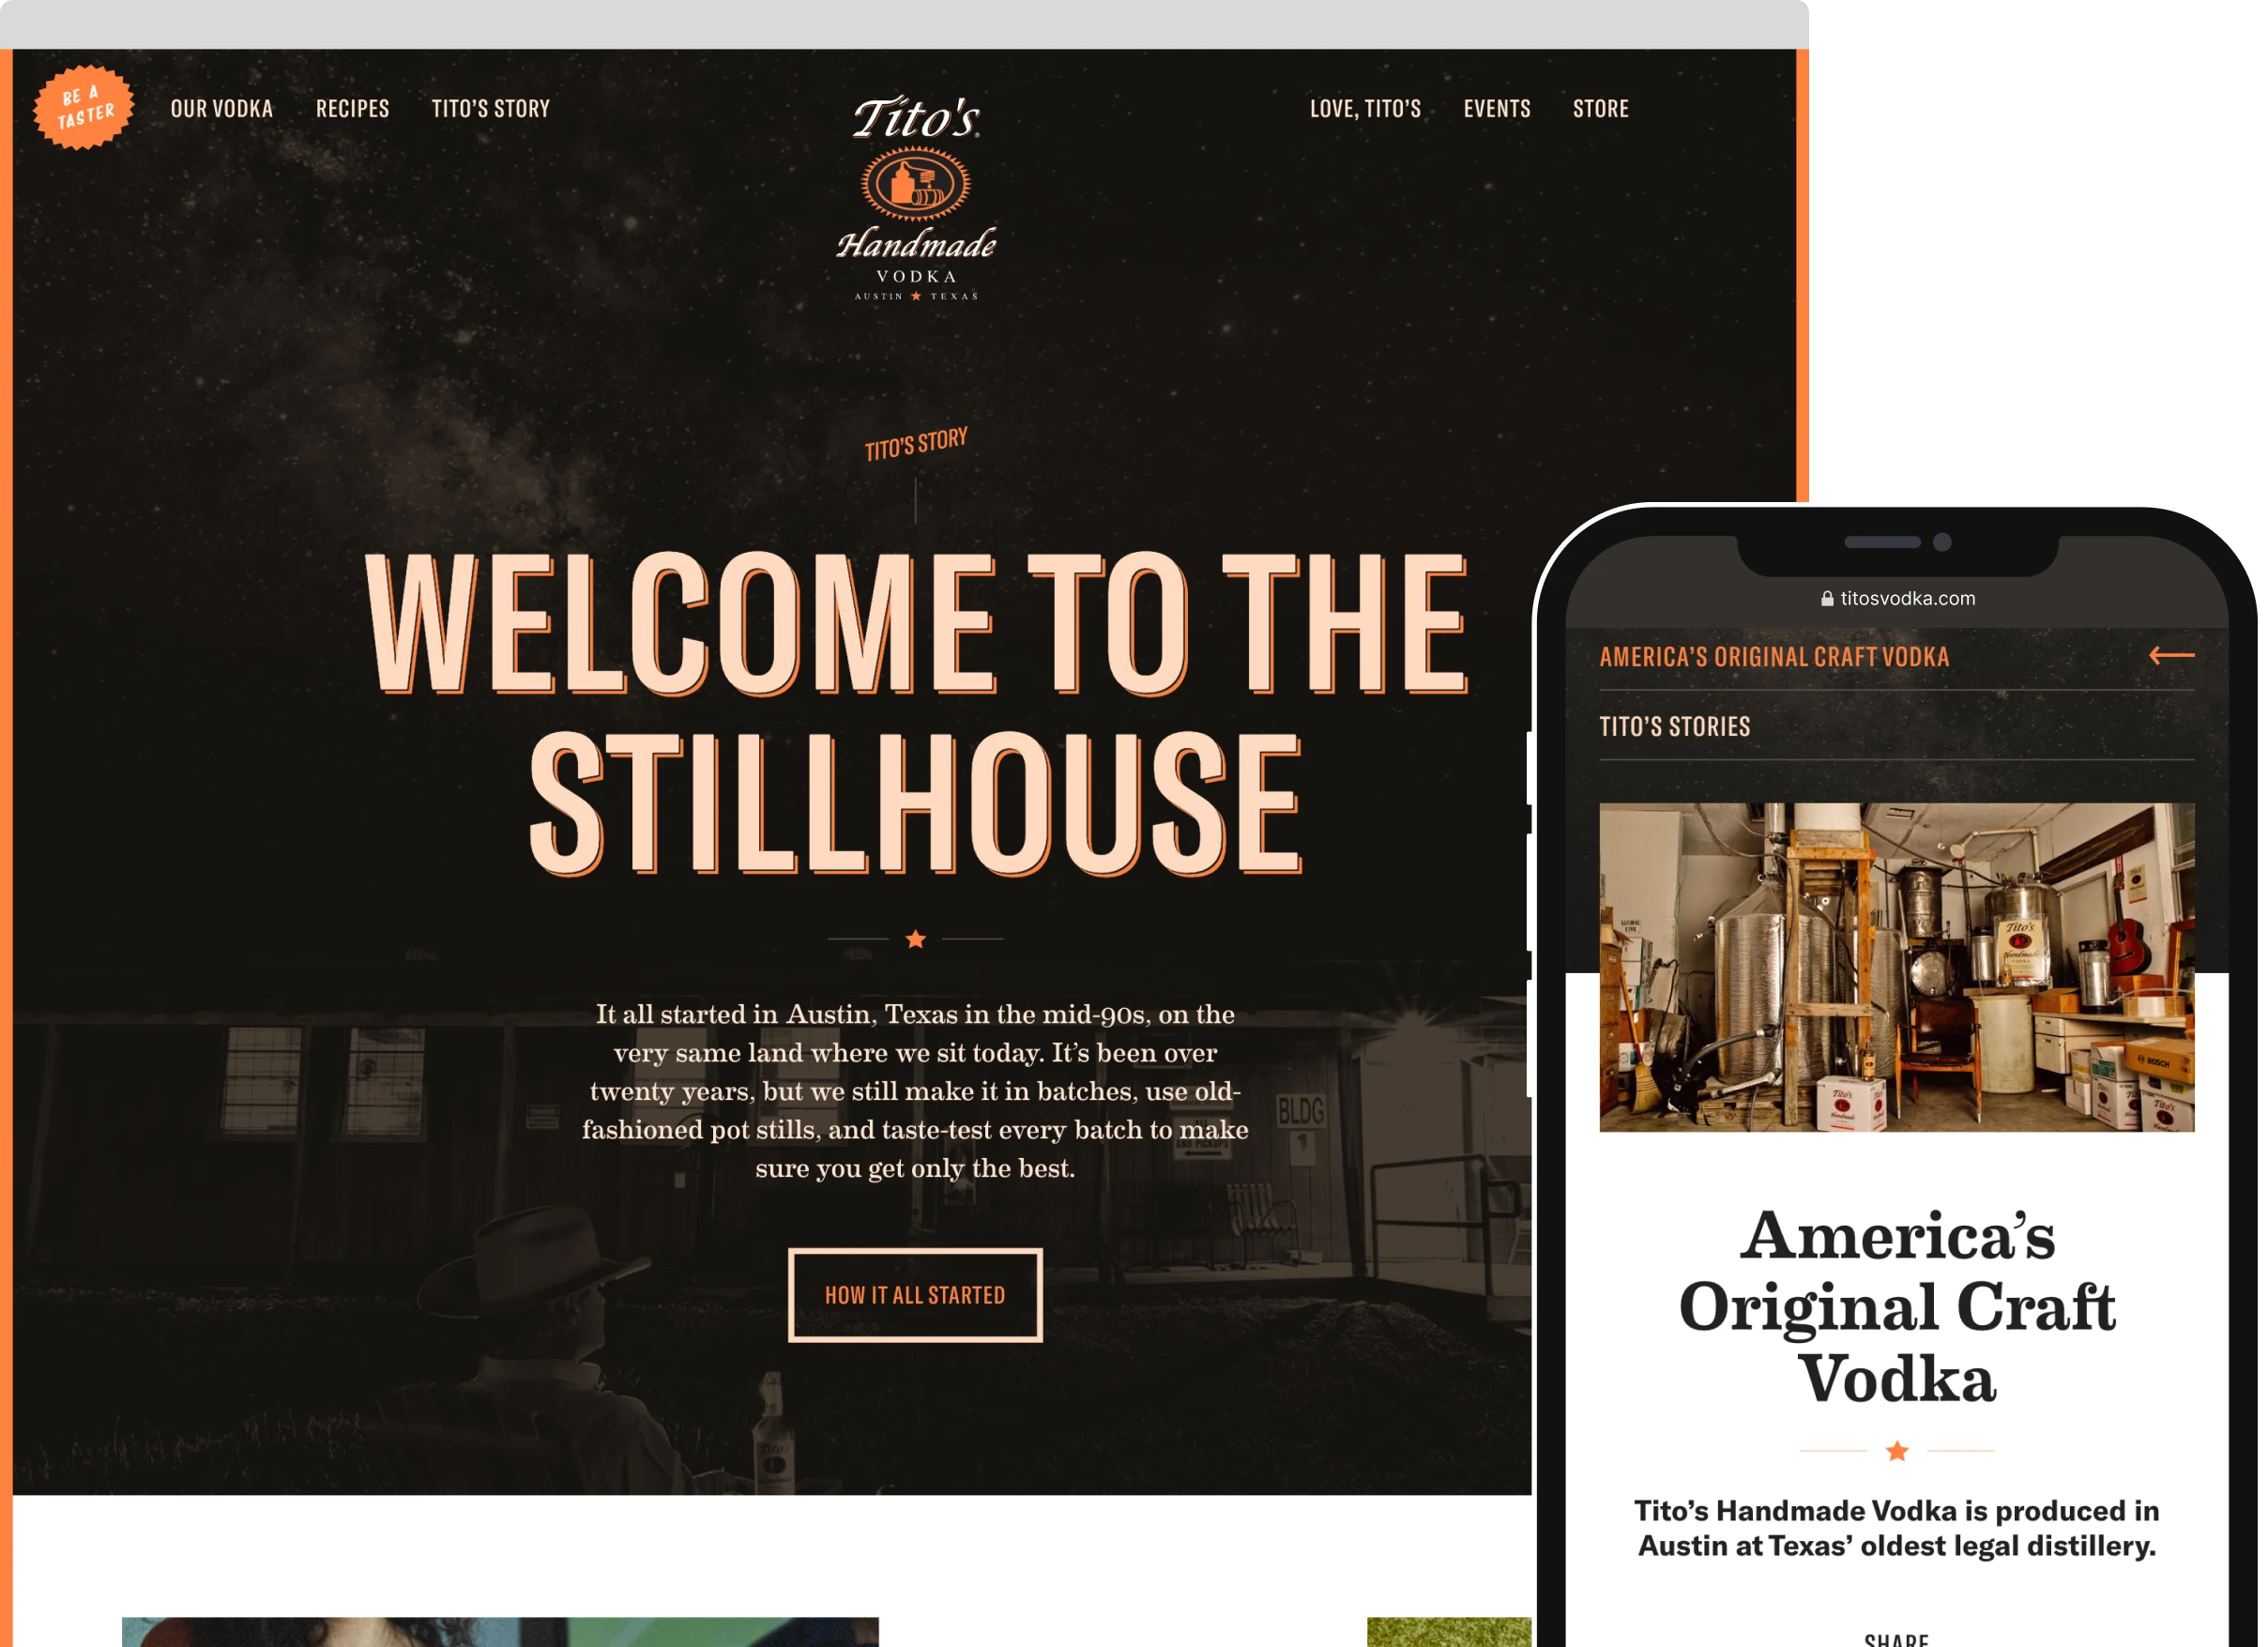 Desktop browser and smartphone displaying the Tito’s Handmade Vodka website